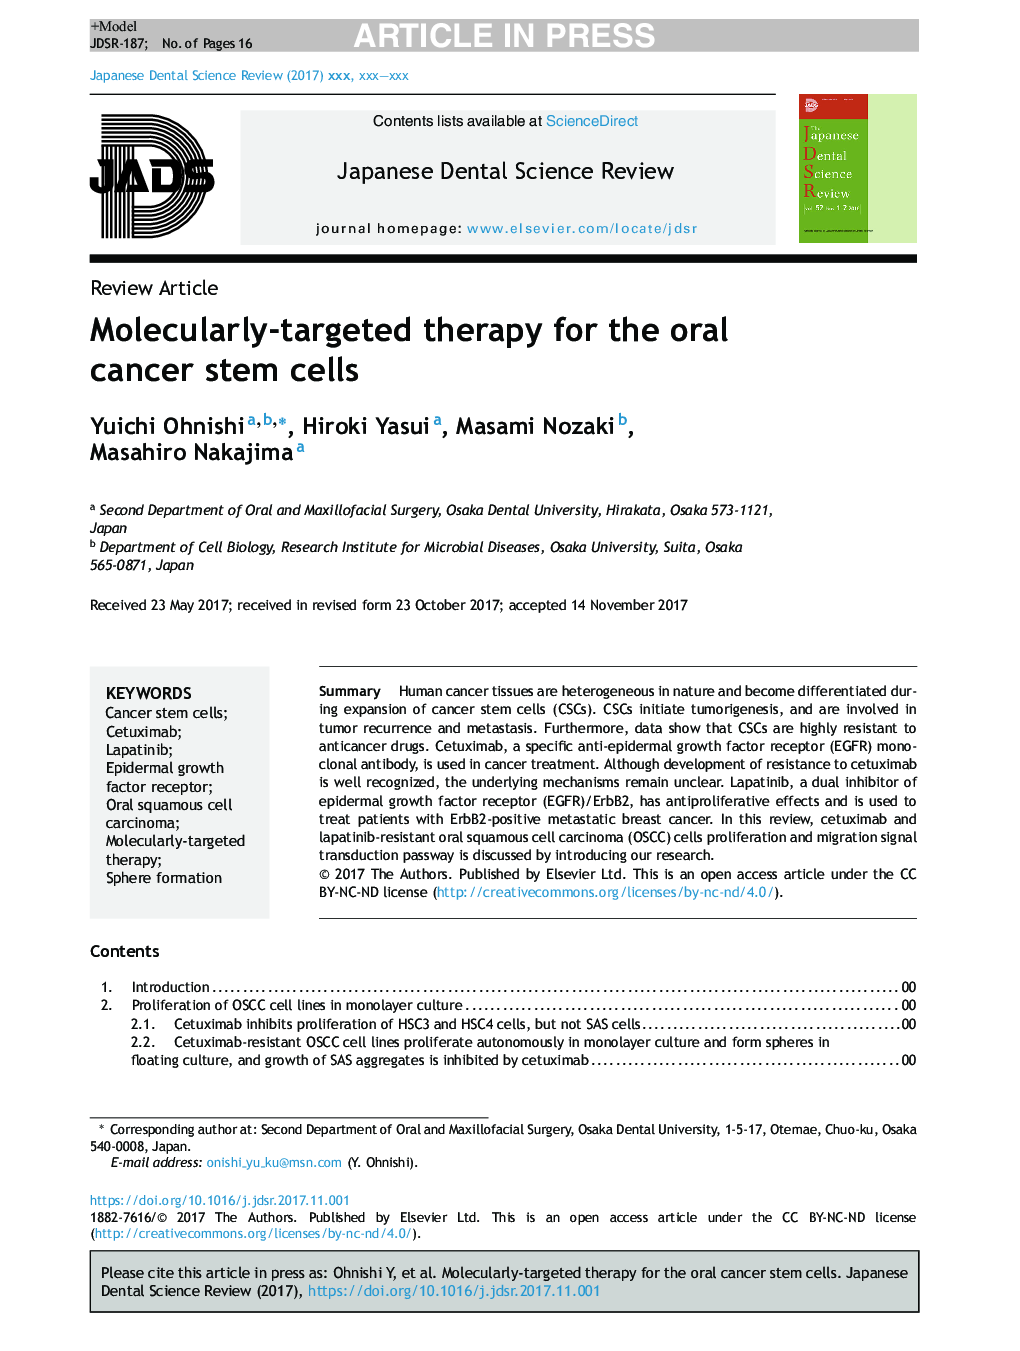 Molecularly-targeted therapy for the oral cancer stem cells